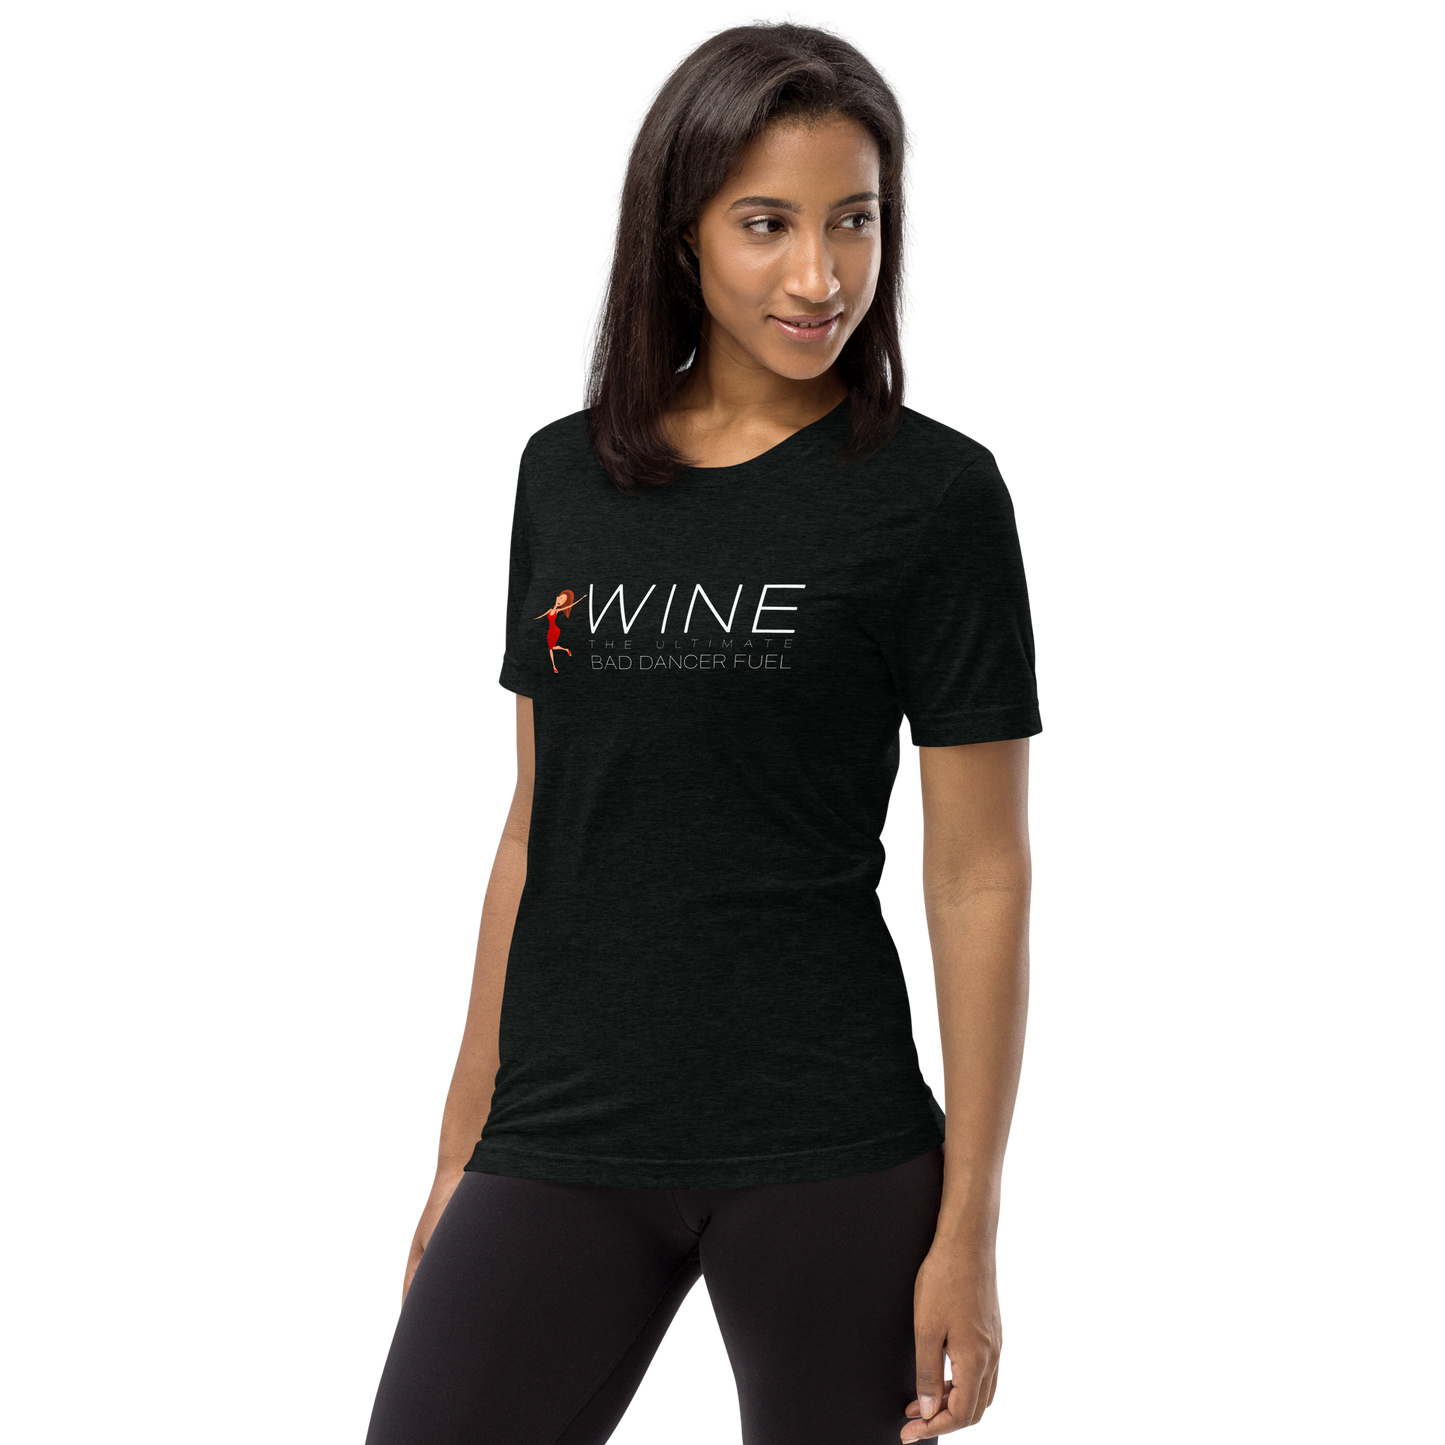 ALCOHOL - Wine the Ultimate Bad Dancer Fuel - Funny T-Shirt